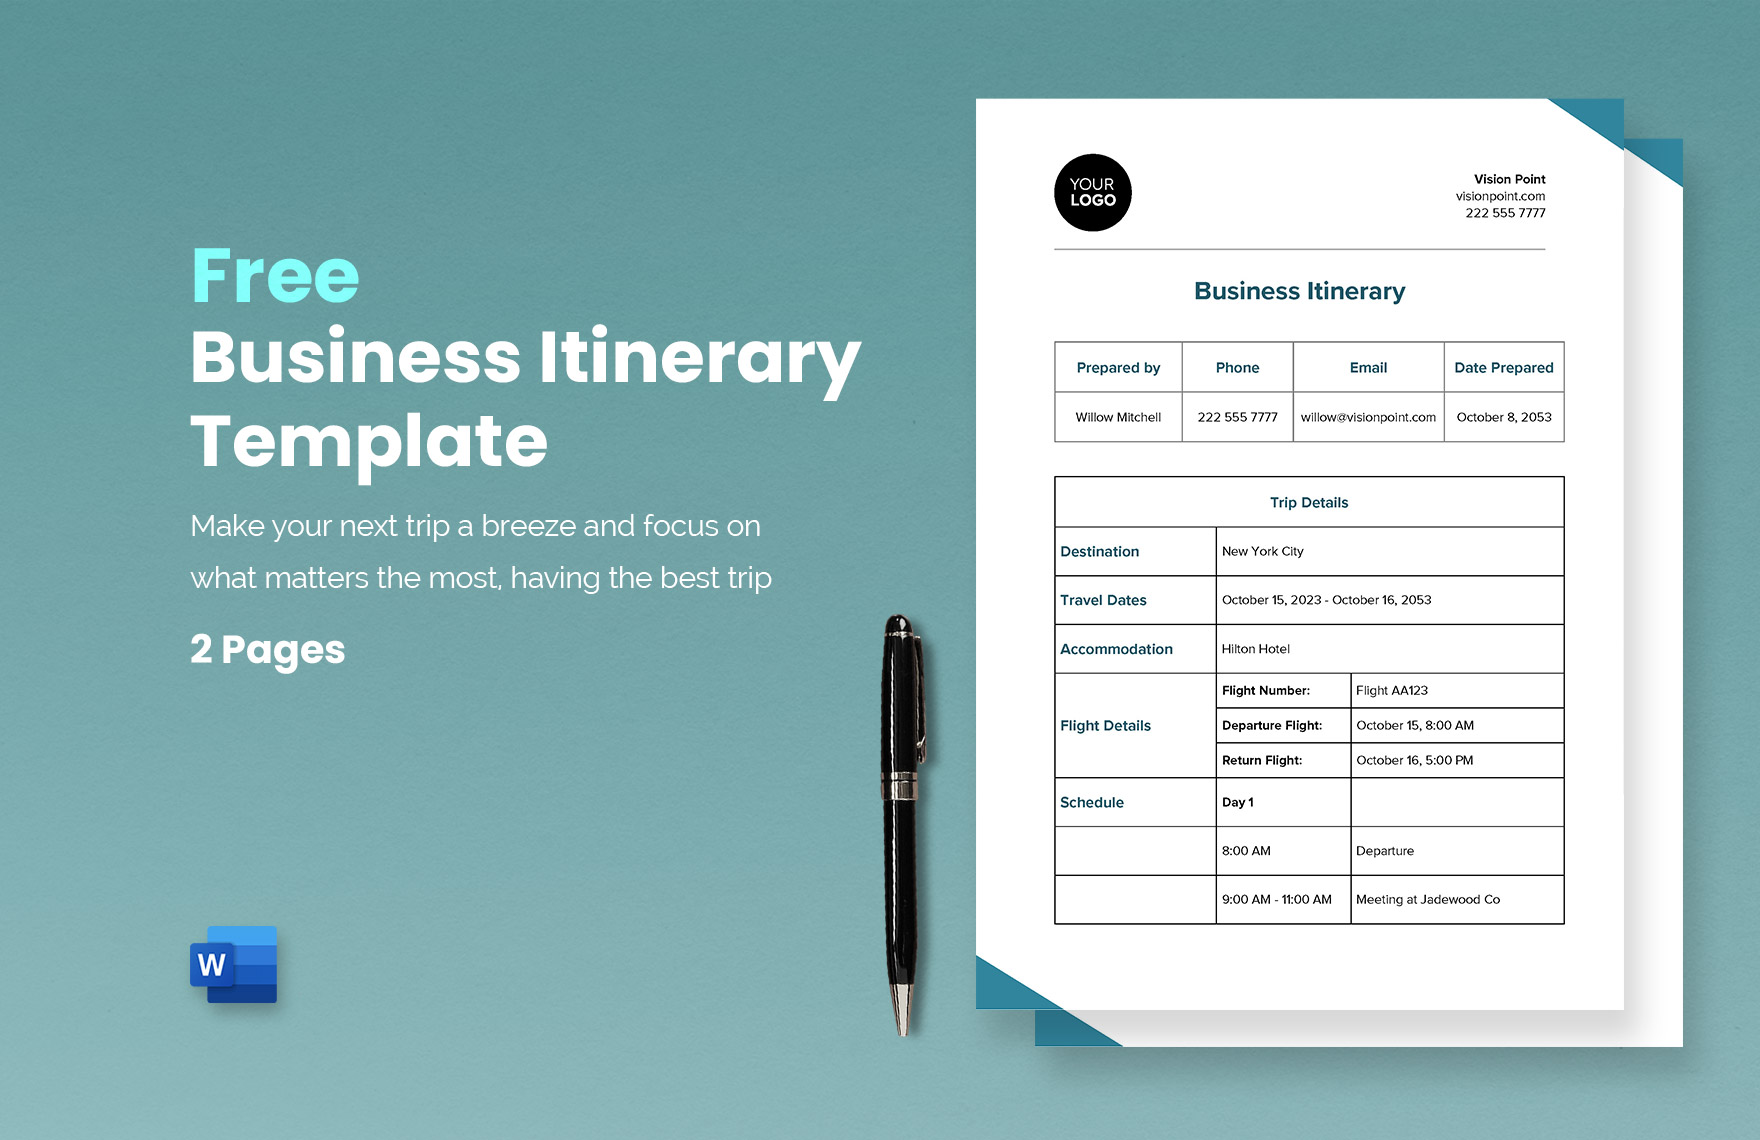 Free Business Itinerary Template